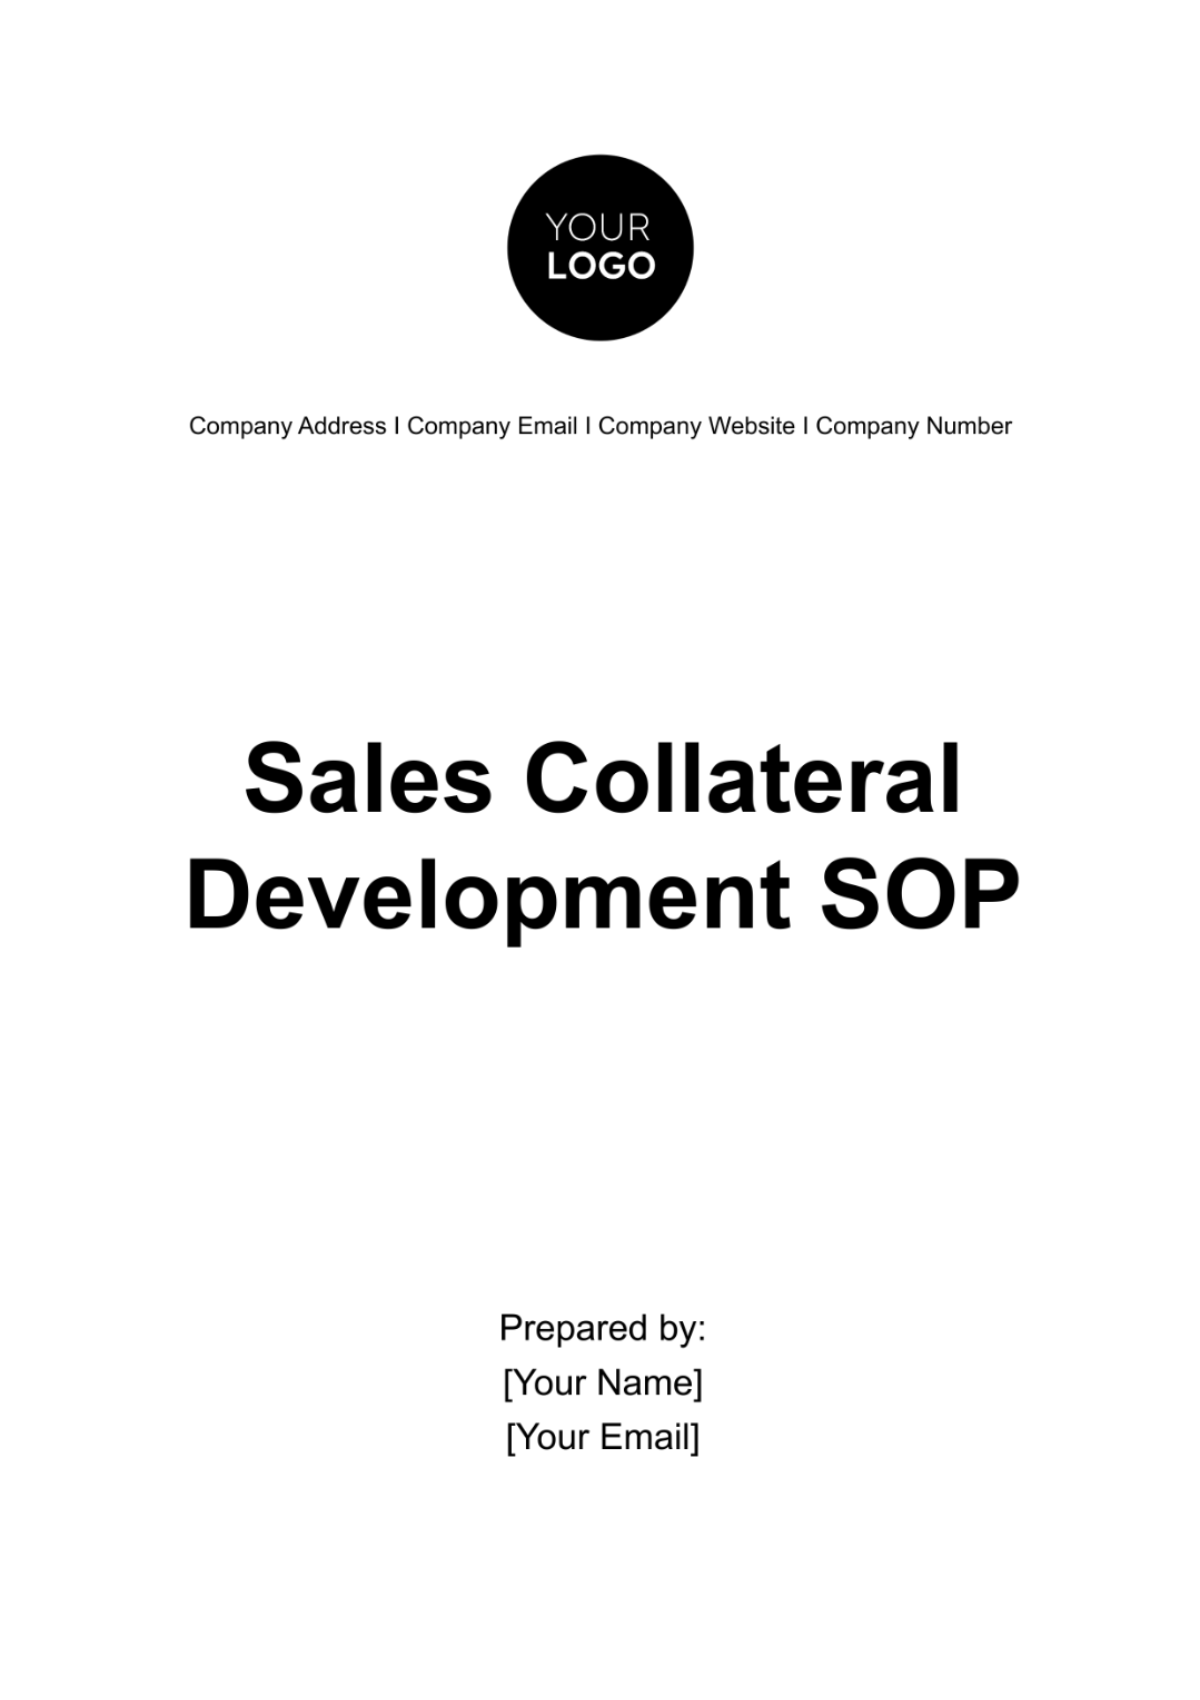 Free Sales Collateral Development SOP Template